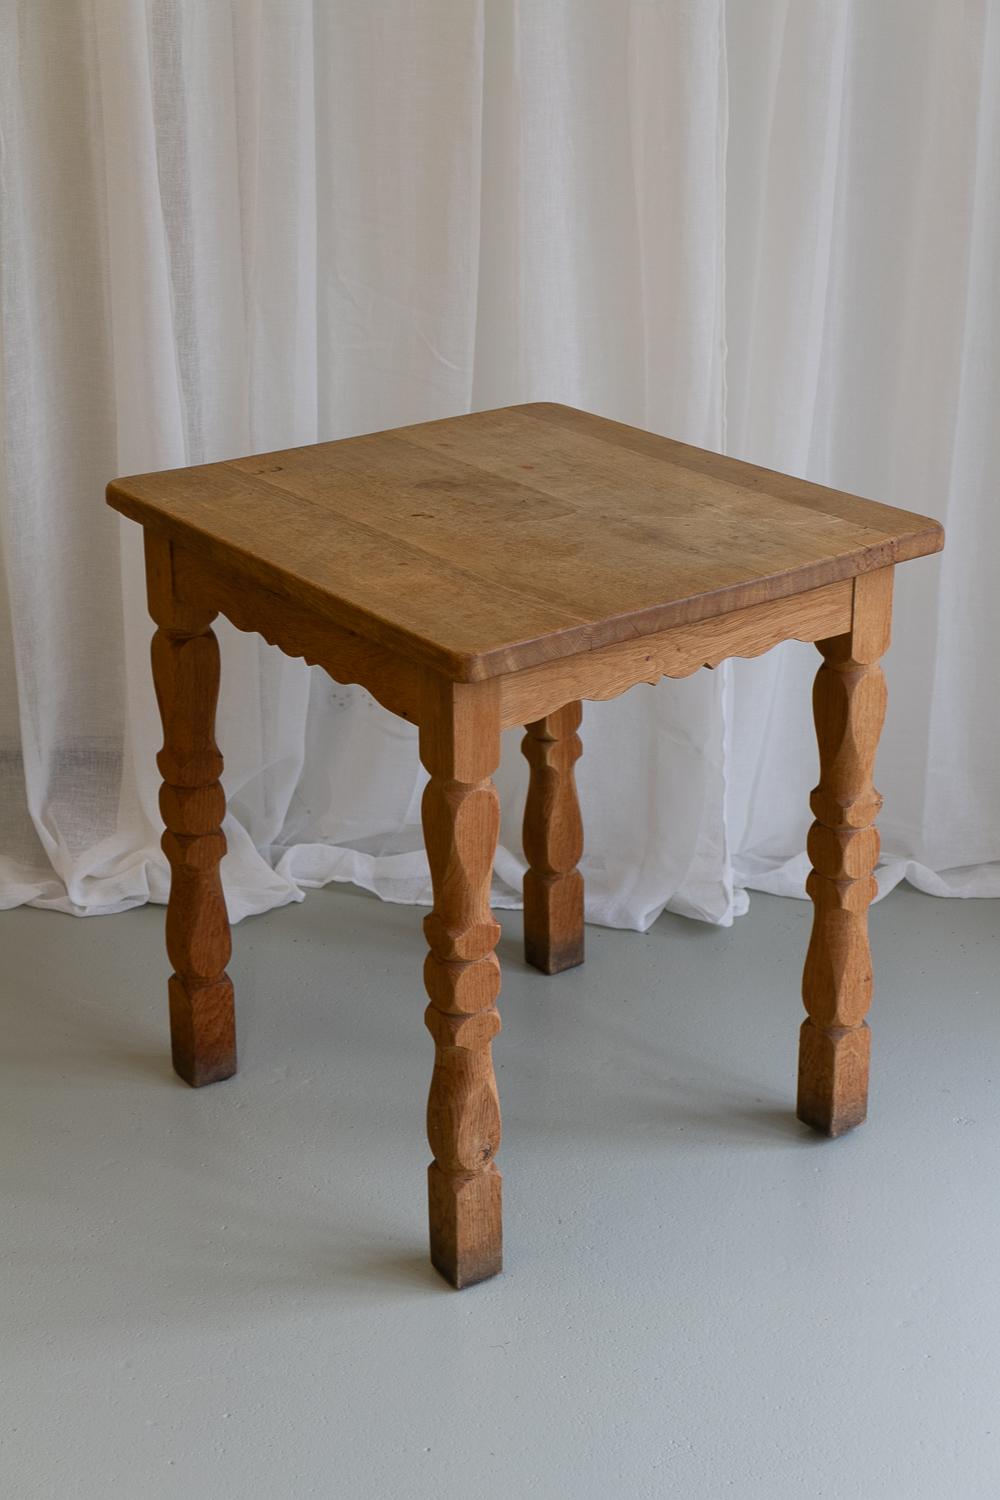 Vintage Danish Oak Table, 1960s.

Rustic Scandinavian Mid-Century Modern small dining table in solid Nordic oak with beautiful turned legs. Attributed to Henning Kjærnulf for EG Møbler, Denmark.
Also suitable as a small desk or serving table.

Good